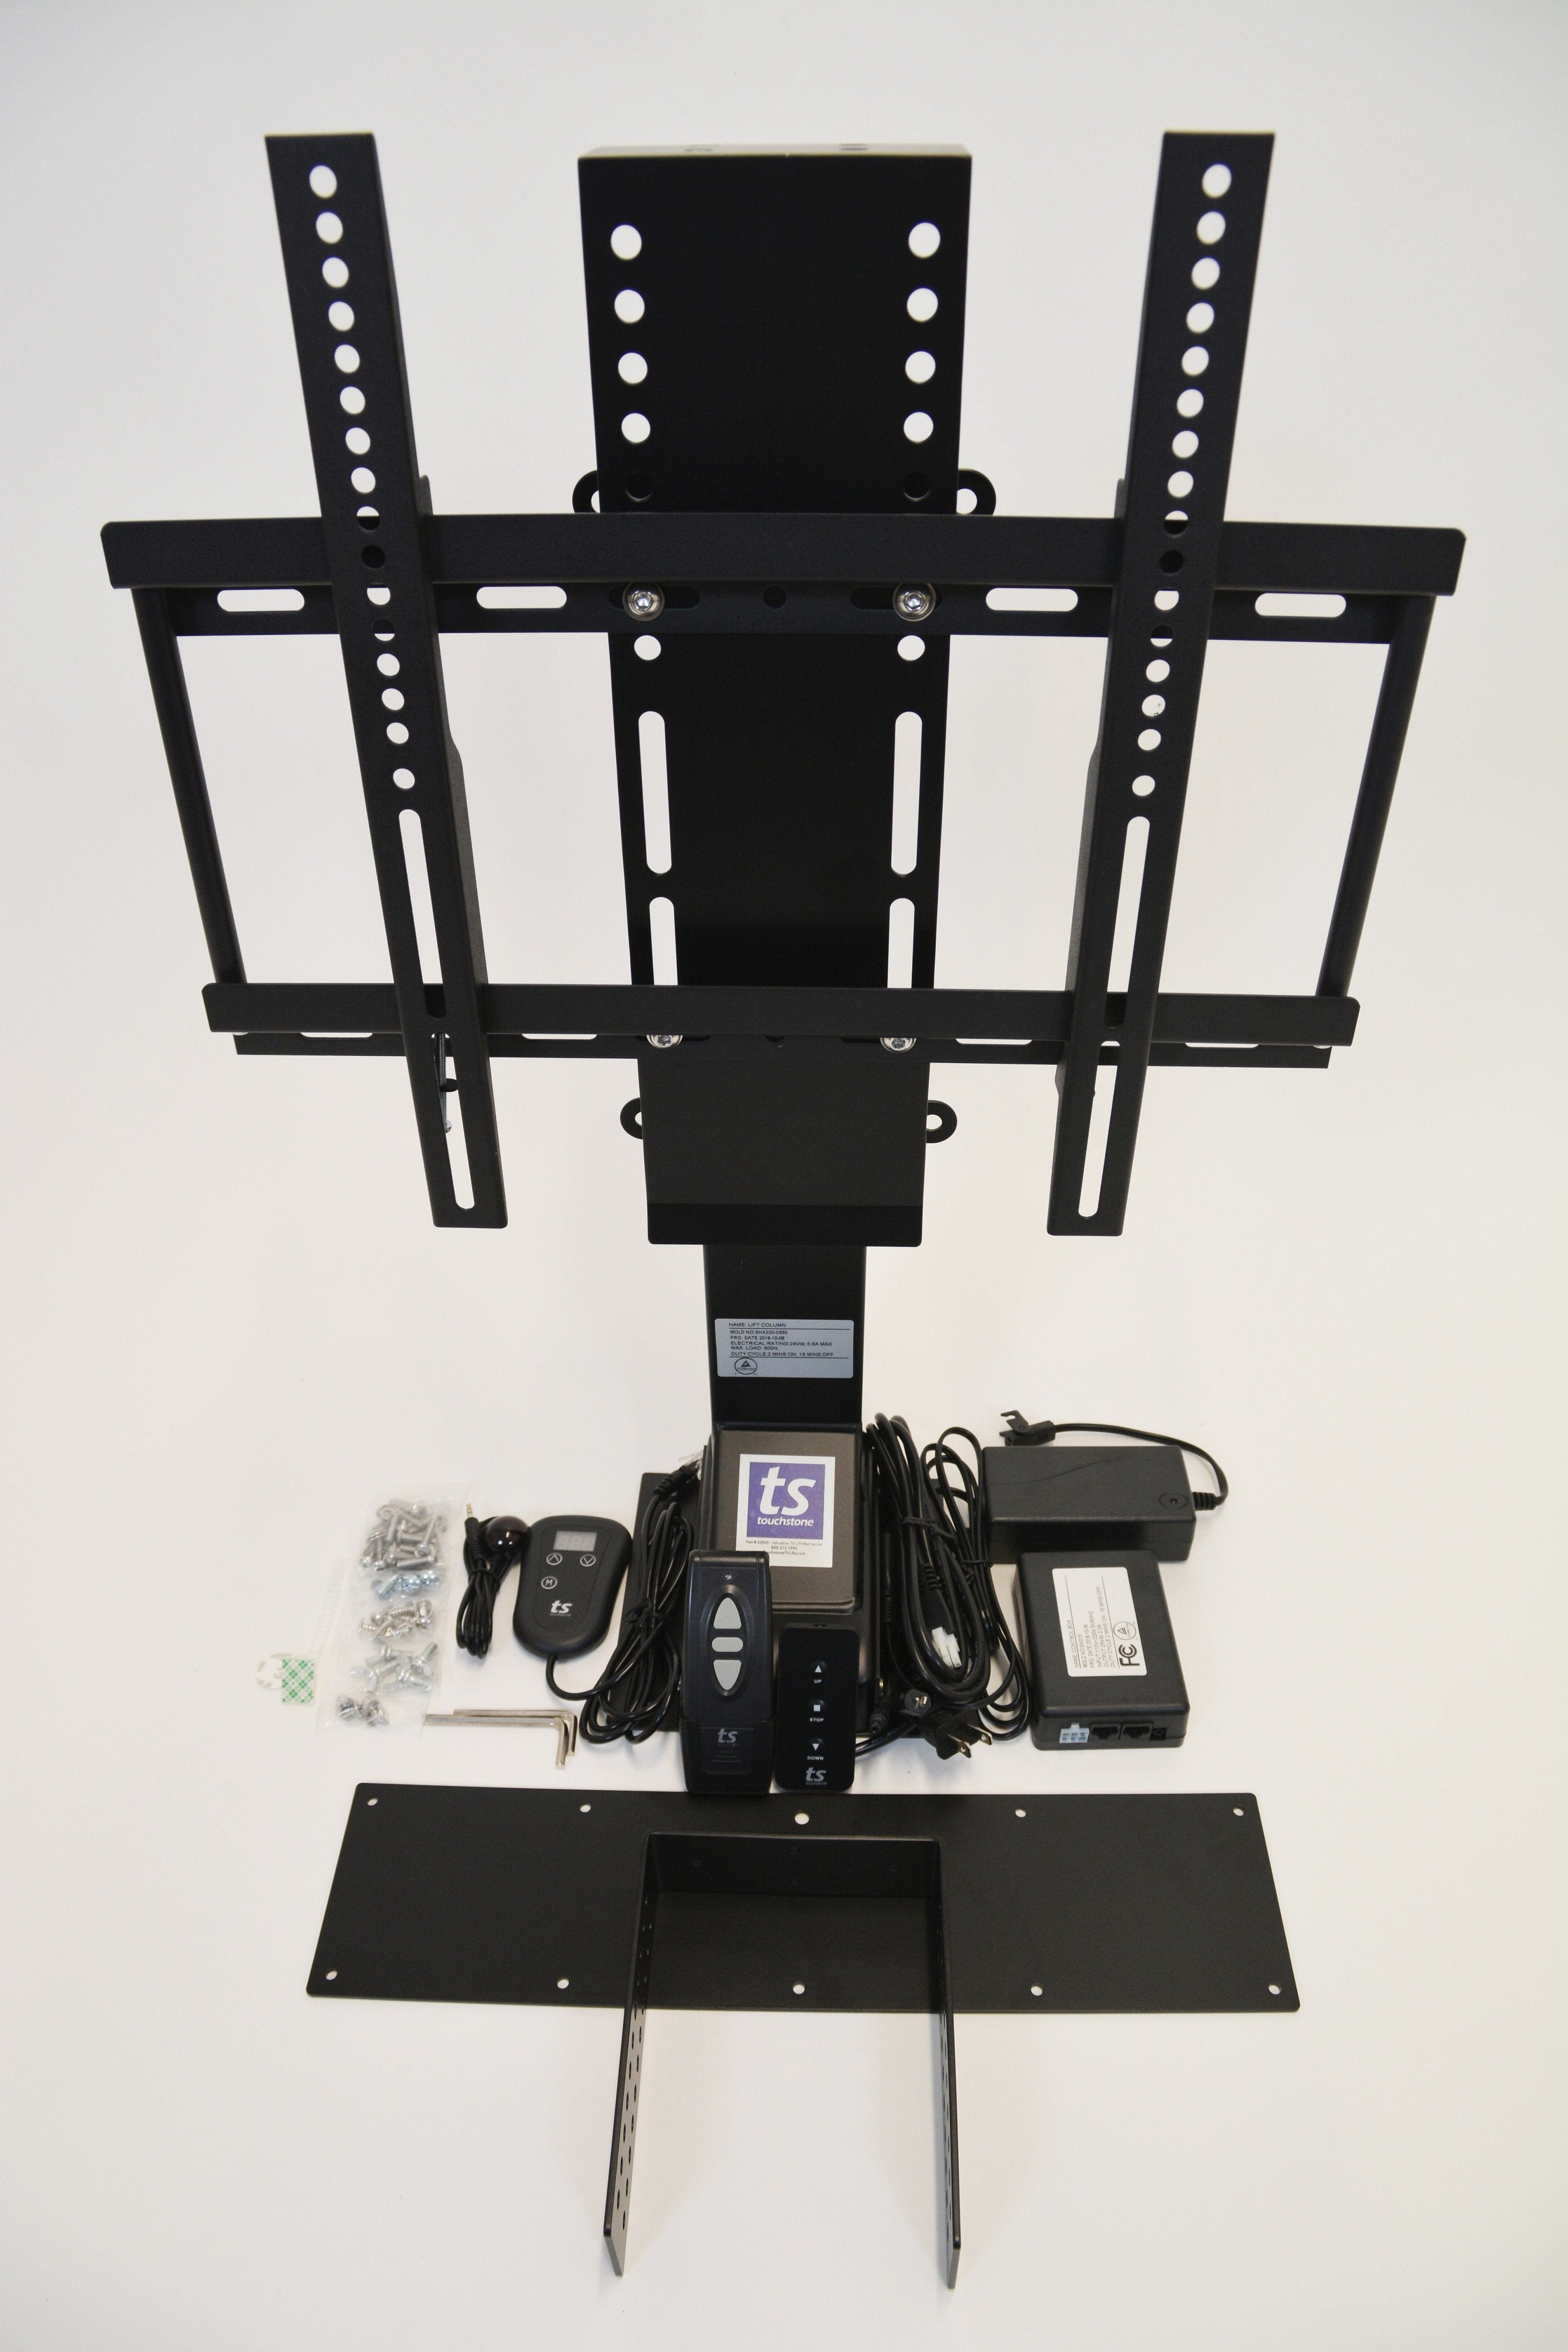 The Touchstone SRV Pro TV Lift included components.